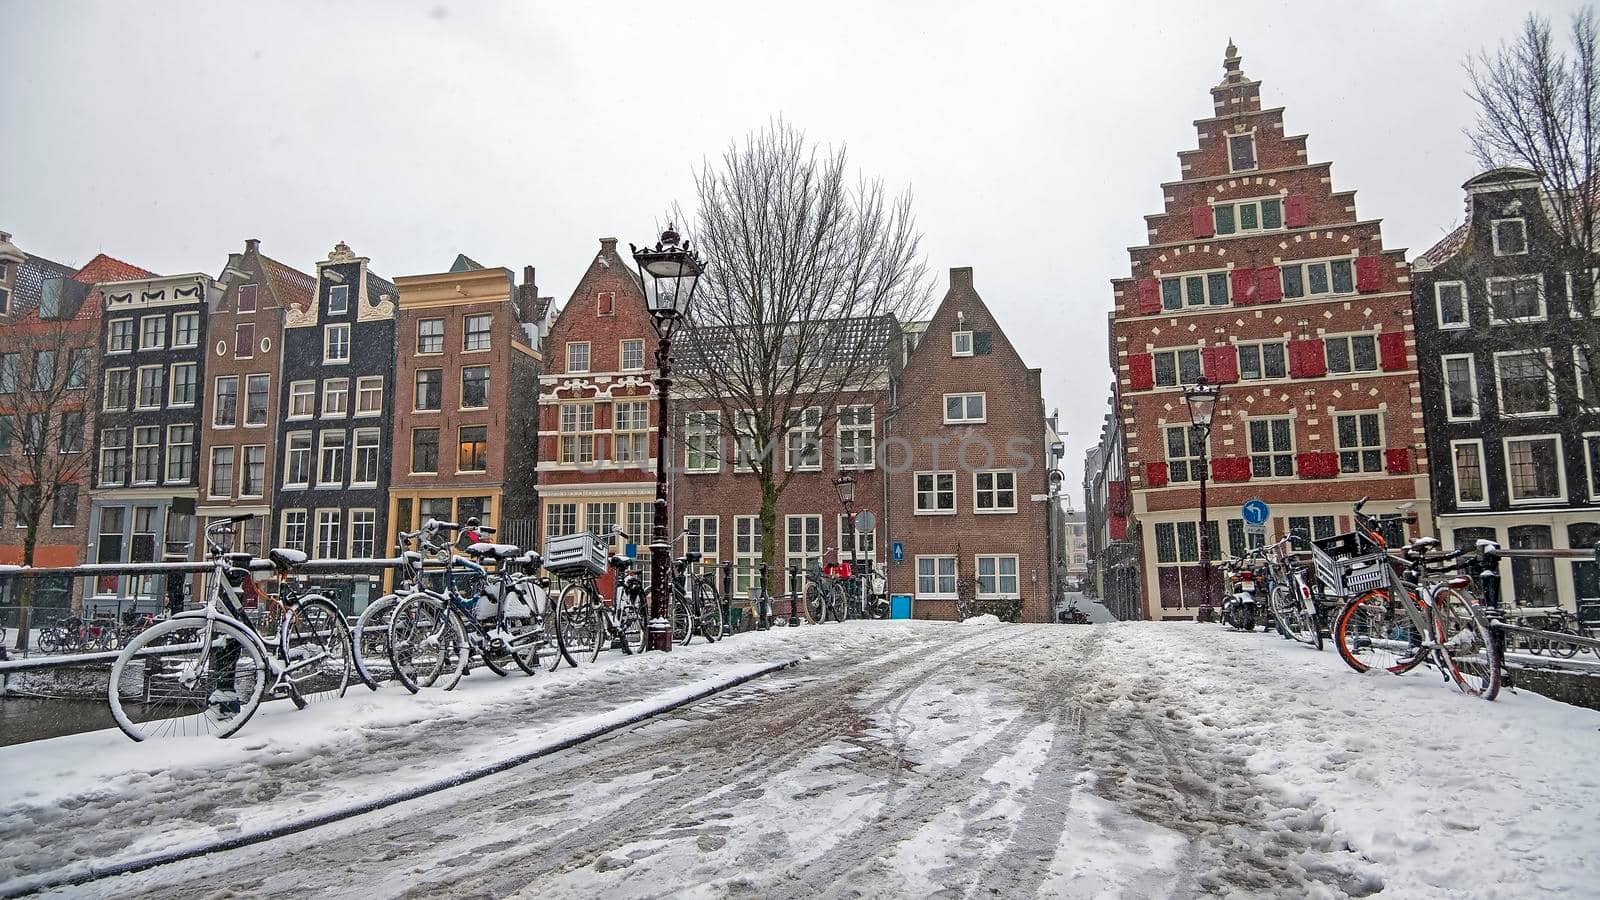 Snowy city Amsterdam in winter in the Netherlands by devy